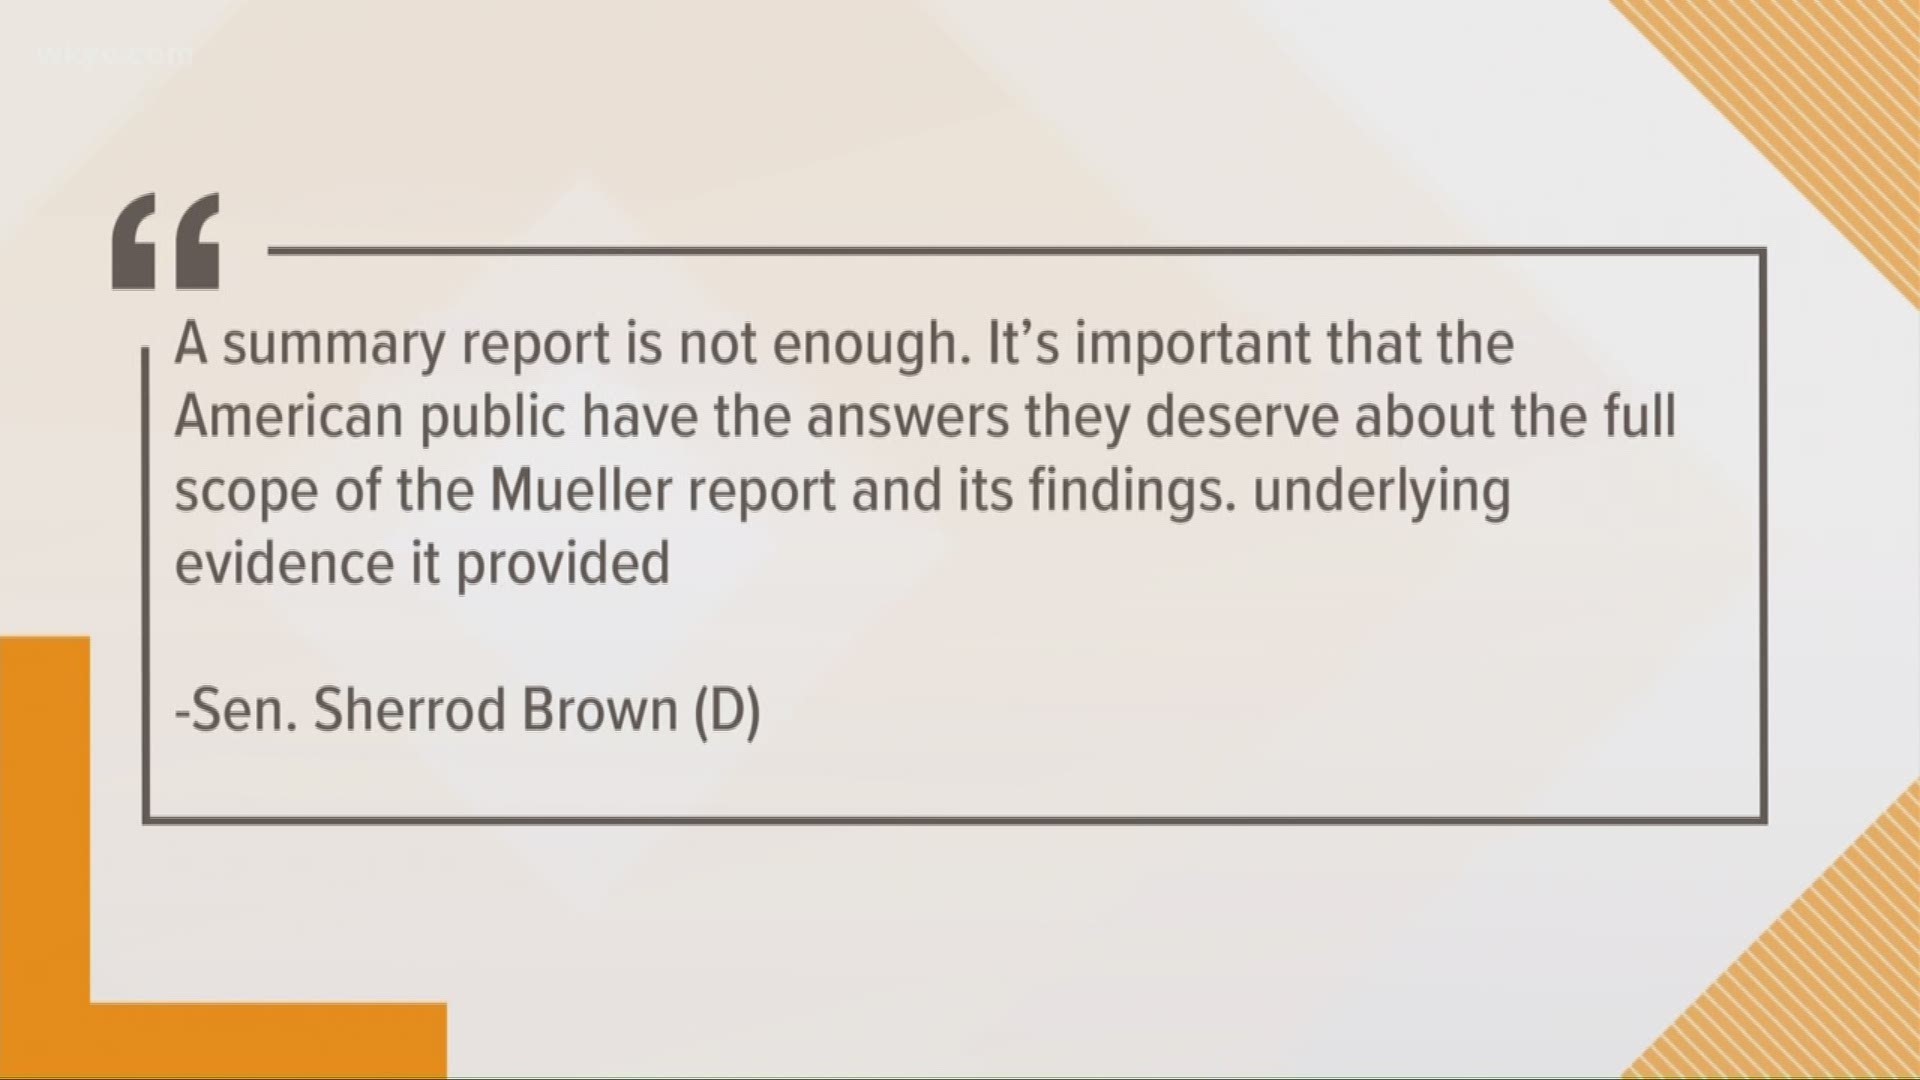 March 25, 2019: U.S. Senator Sherrod Brown, a Democrat of Ohio, released the following statement in response to the summary of the Robert Mueller report released by the Department of Justice.